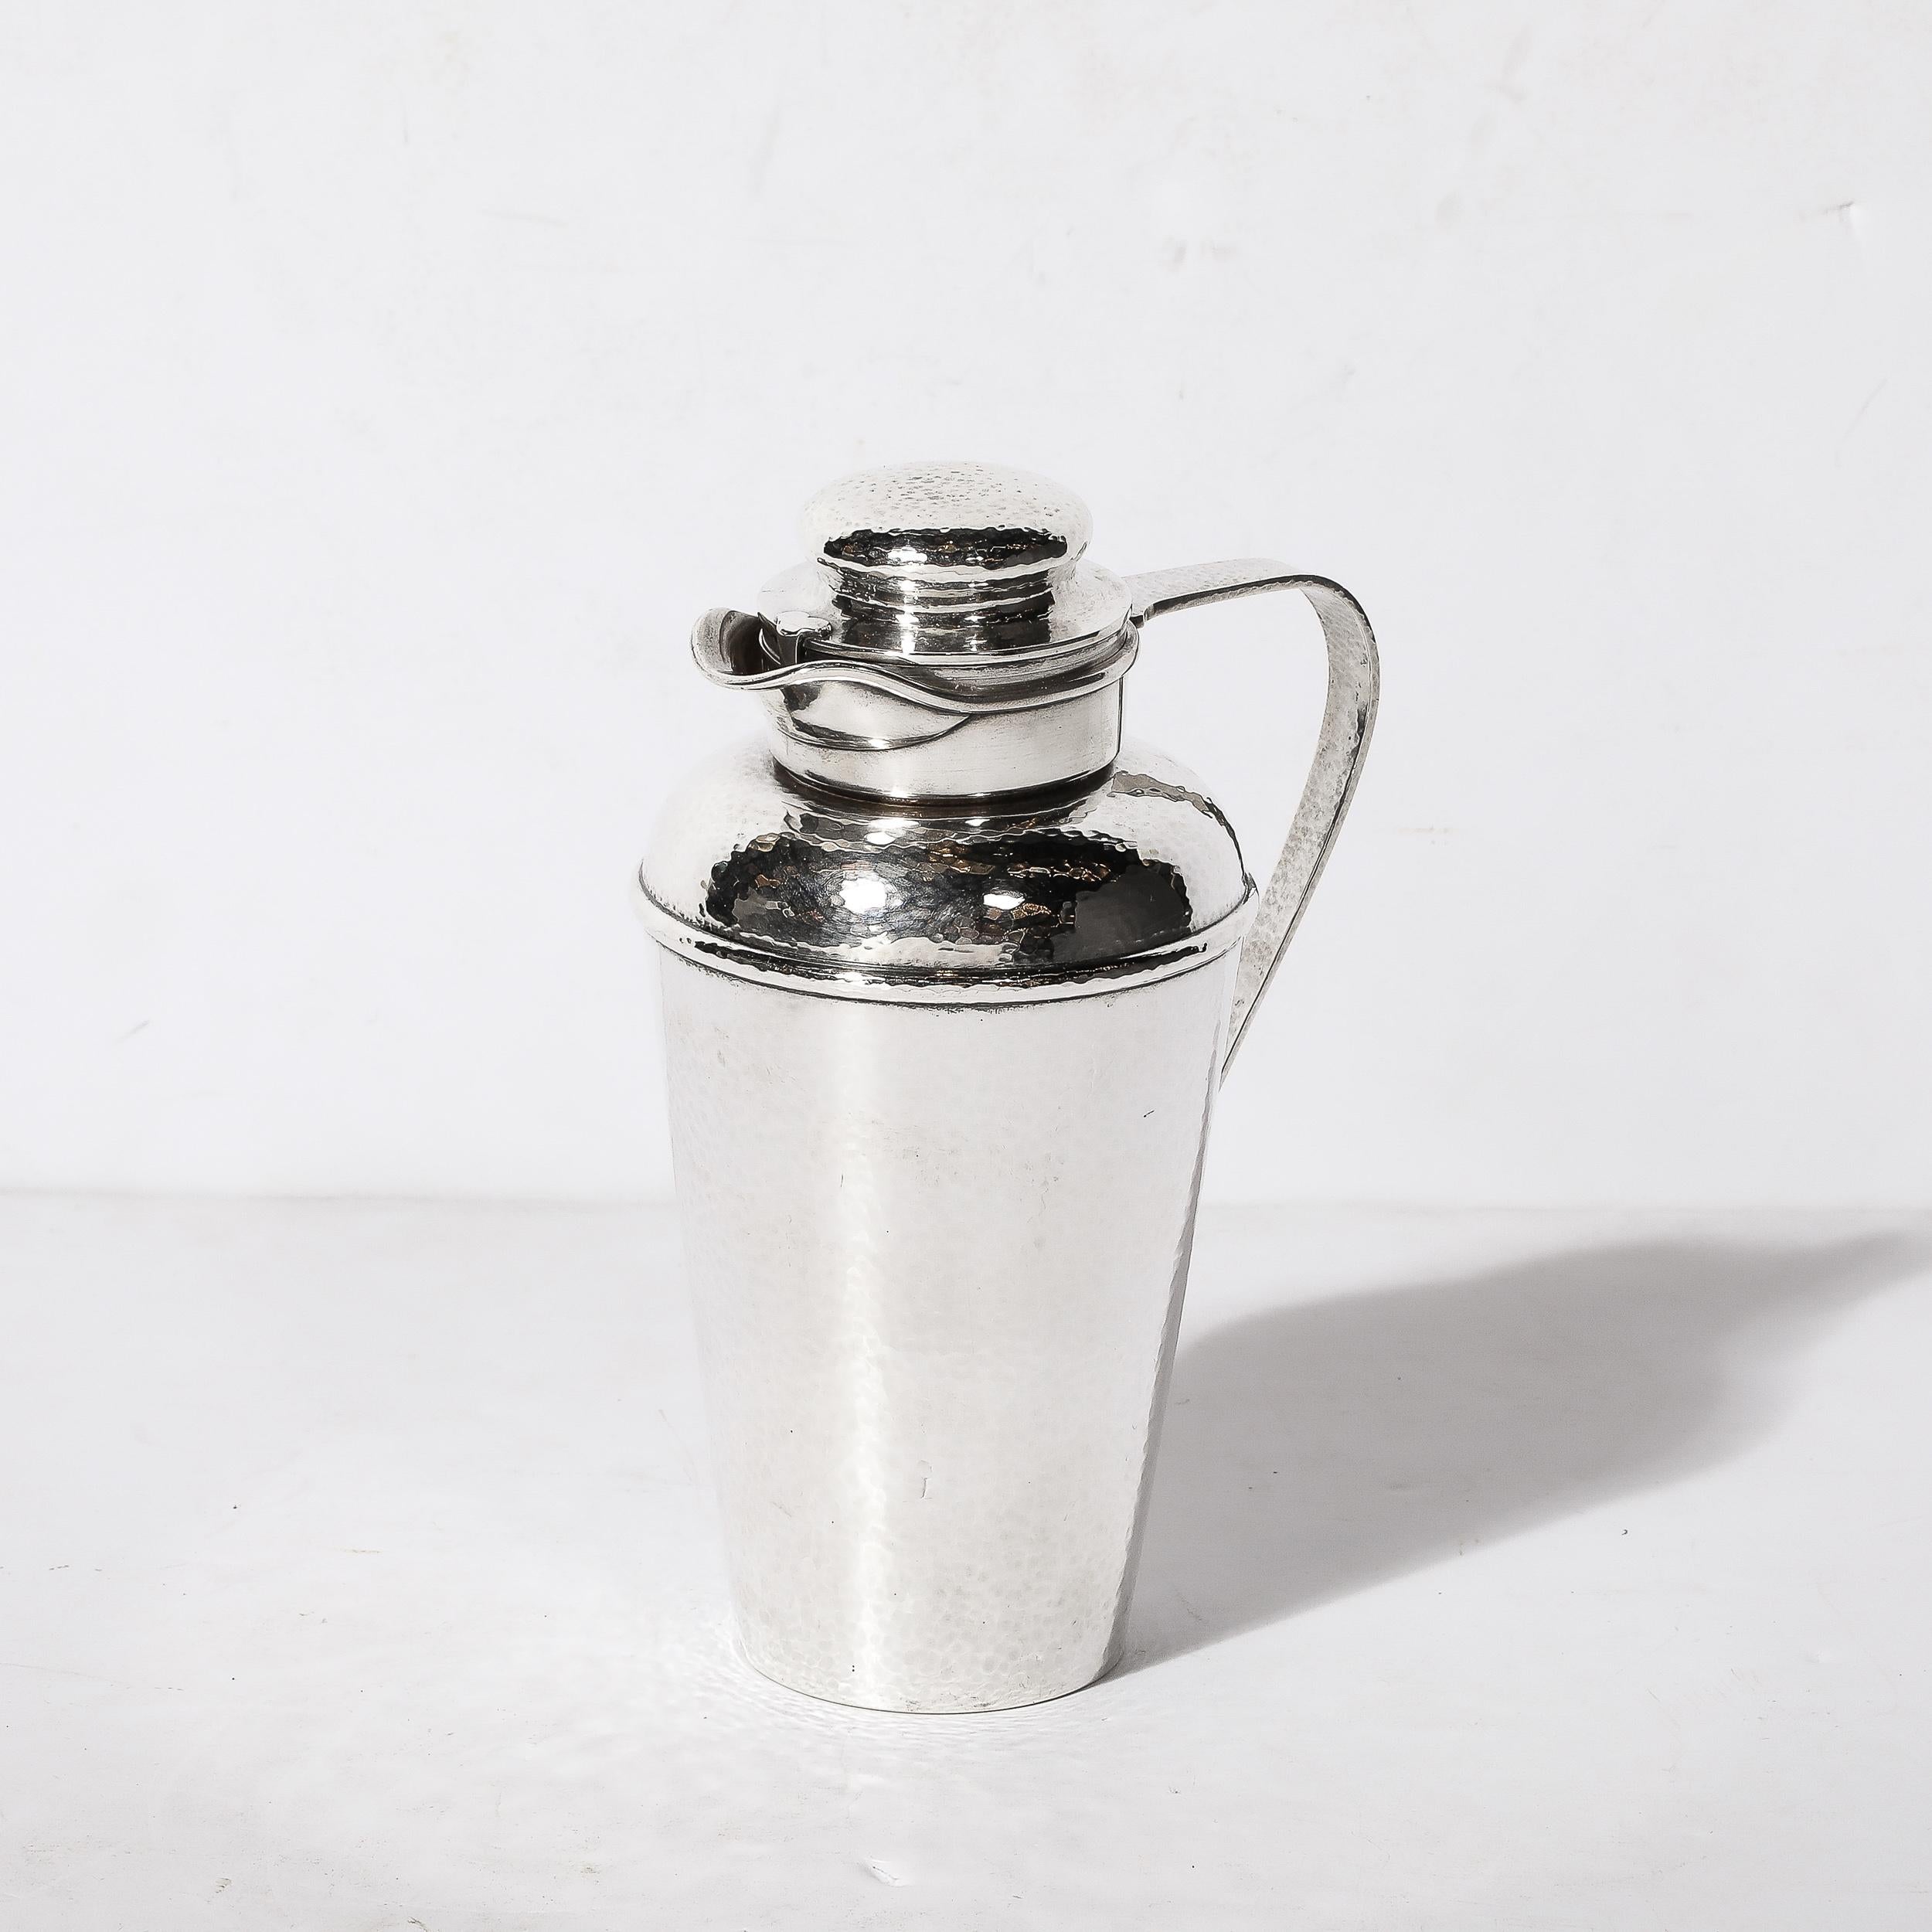 This brilliant Art Deco Hand-Hammered Sterling Silver Cocktail Shaker is by Gorham and originates from the United States, Circa 1925. Feautures hand-hammered textural detailing throughout the piece with an elegant minimal handle and tapered body,